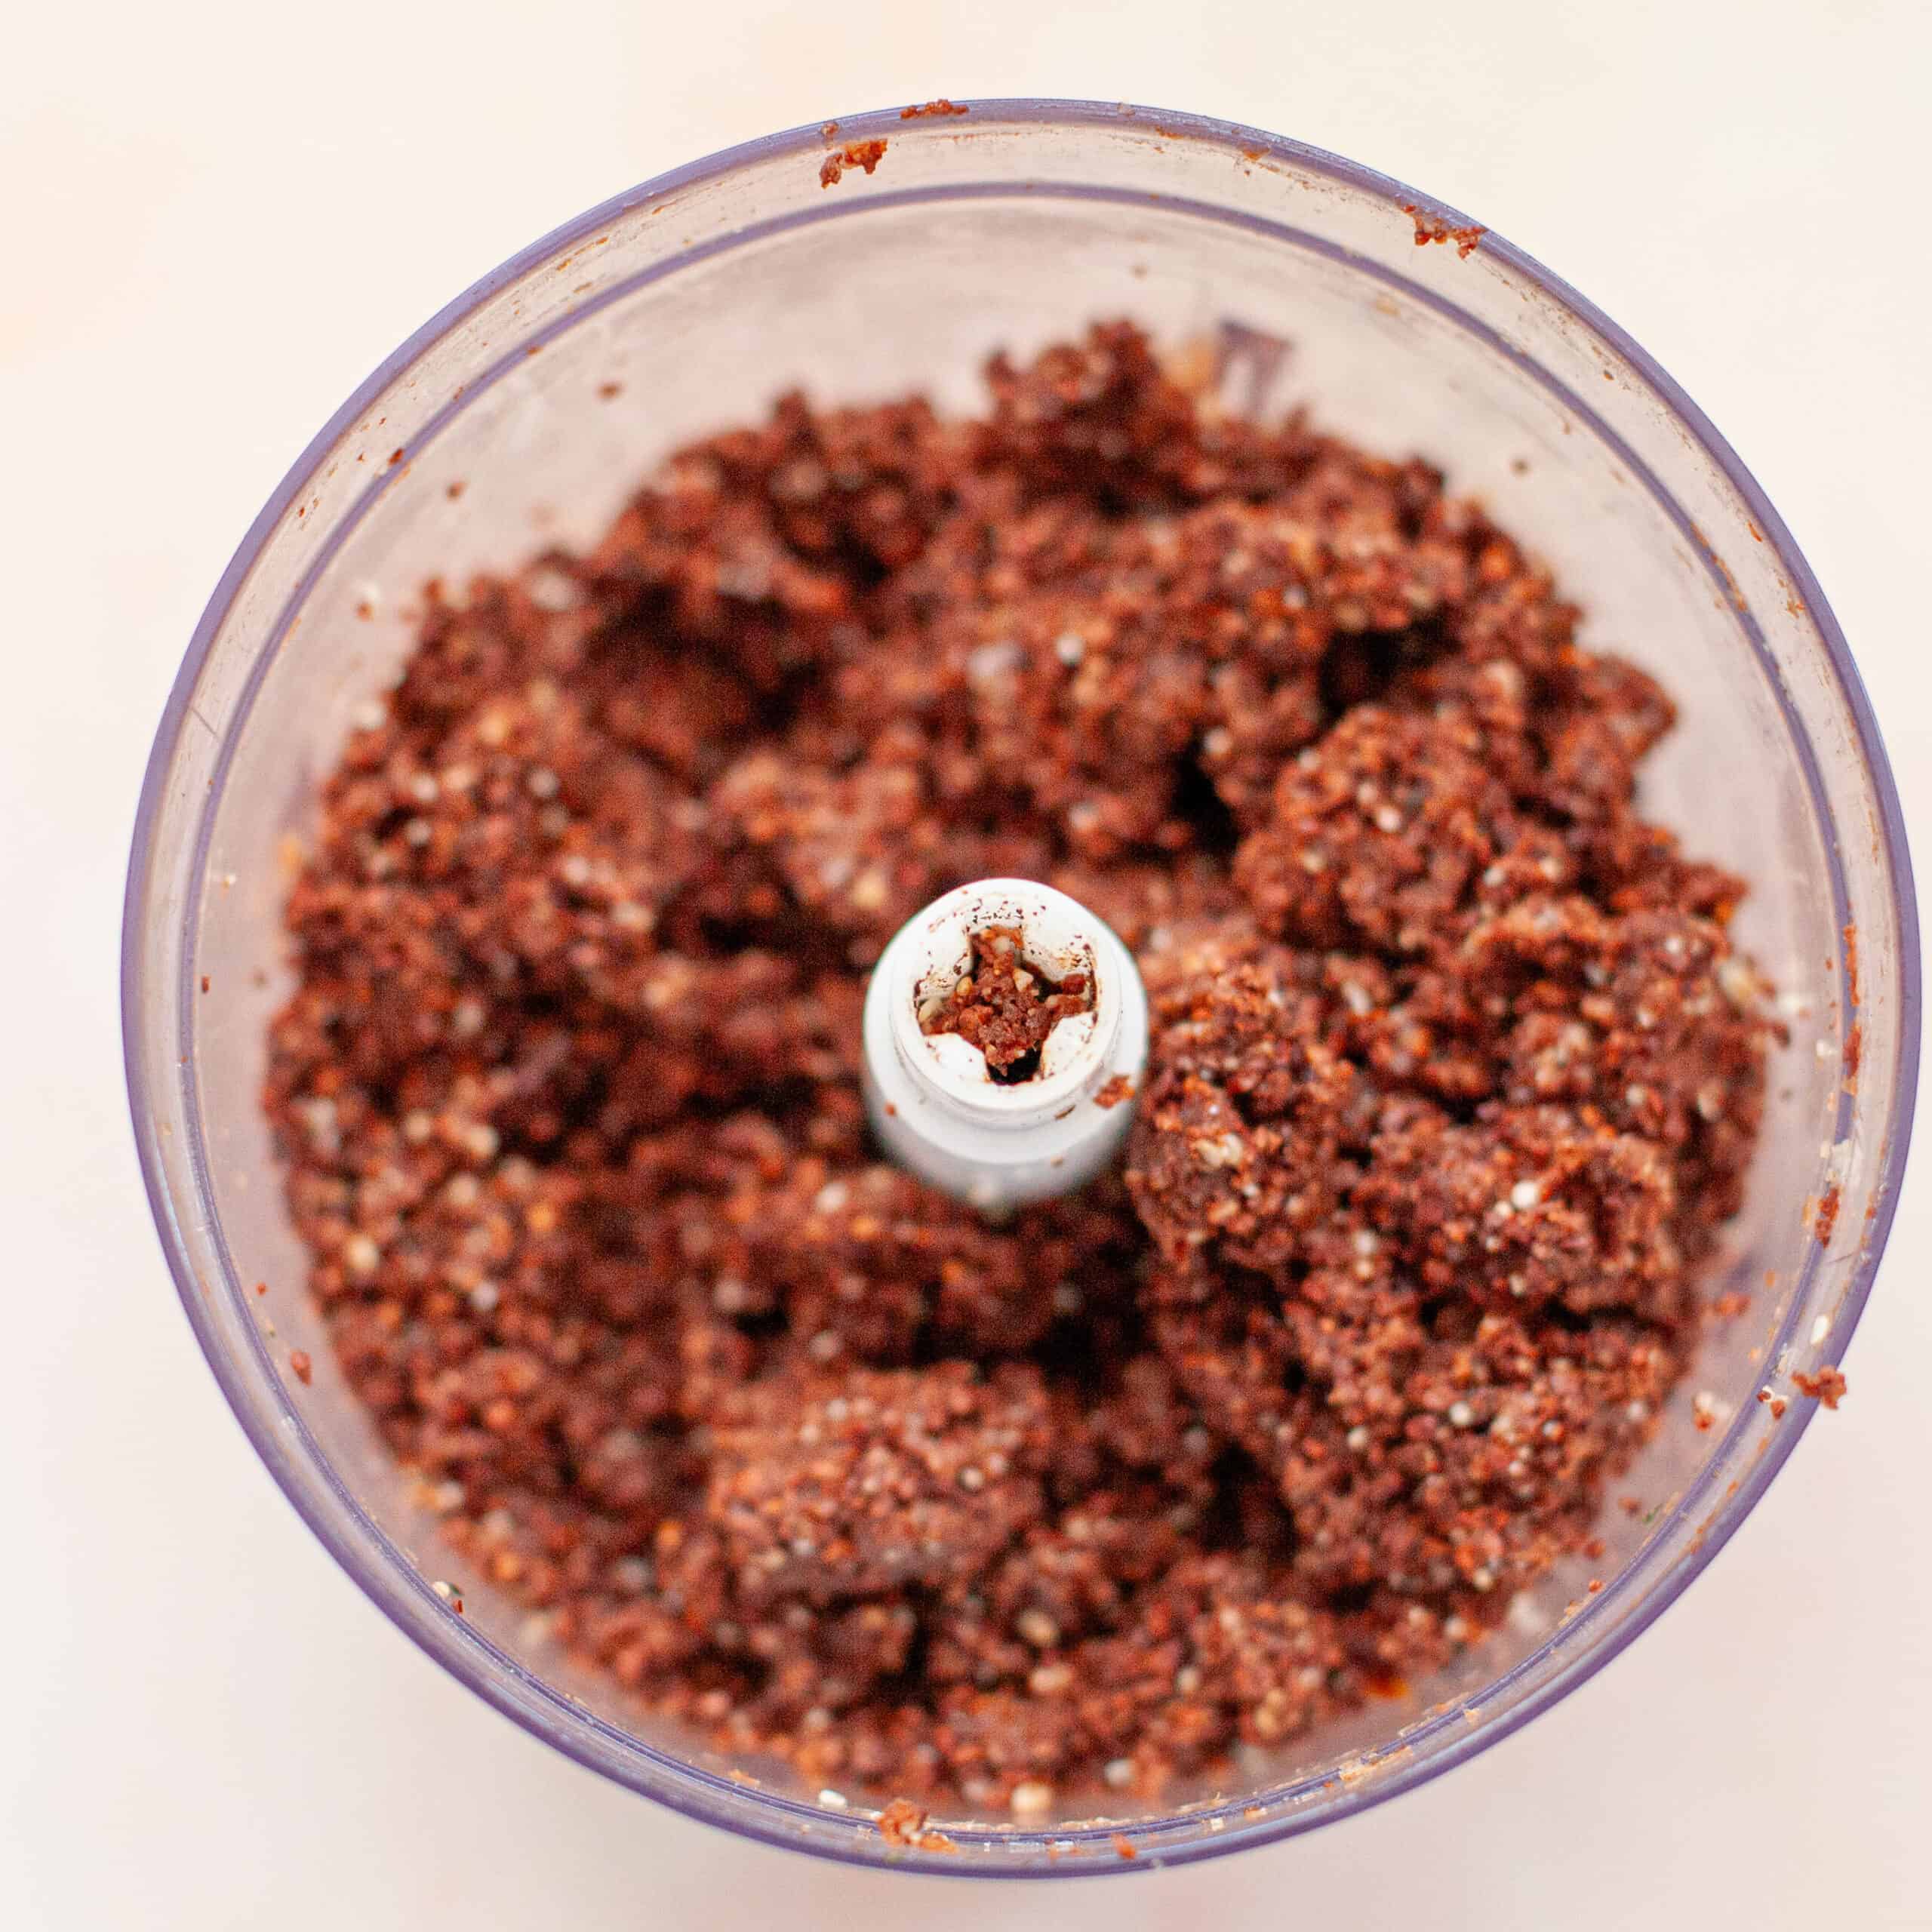 Blended mixture of cacao truffles